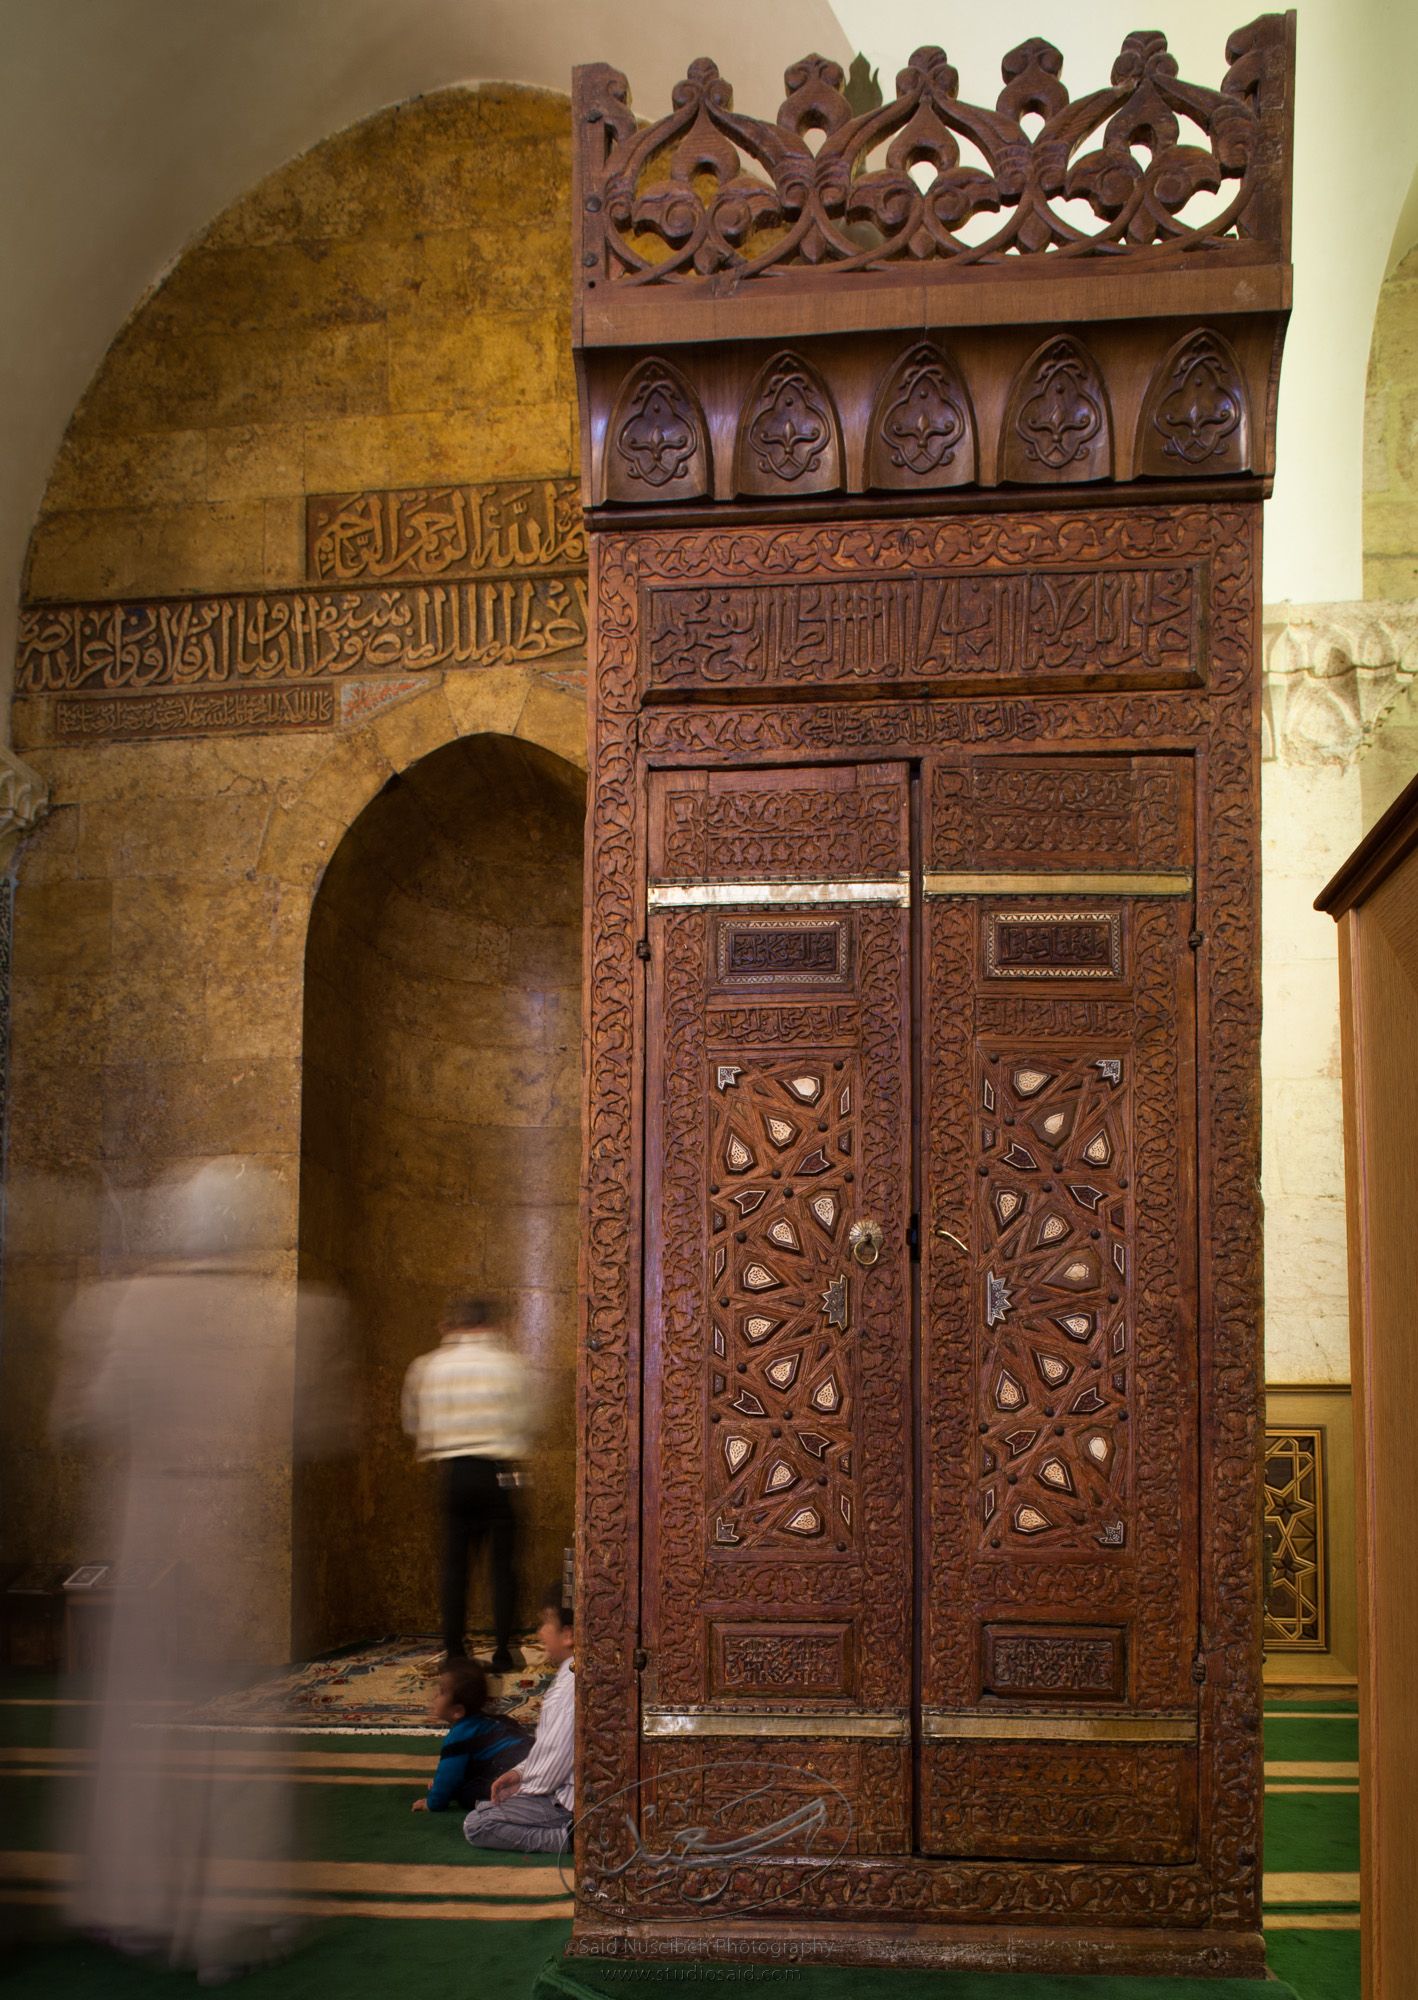 "Mihrab and Minbar, Front."    The late-13th / early-14th c. Mamluk minbar, or pulpit, of Sultan al-Nasir Muhammad, the ninth Mamluk Sultan from Cairo and son of Qalawun. The minbar was located in the Umayyad Mosque in Aleppo, Haleb, prior to its damage and disappearance in May 2013.